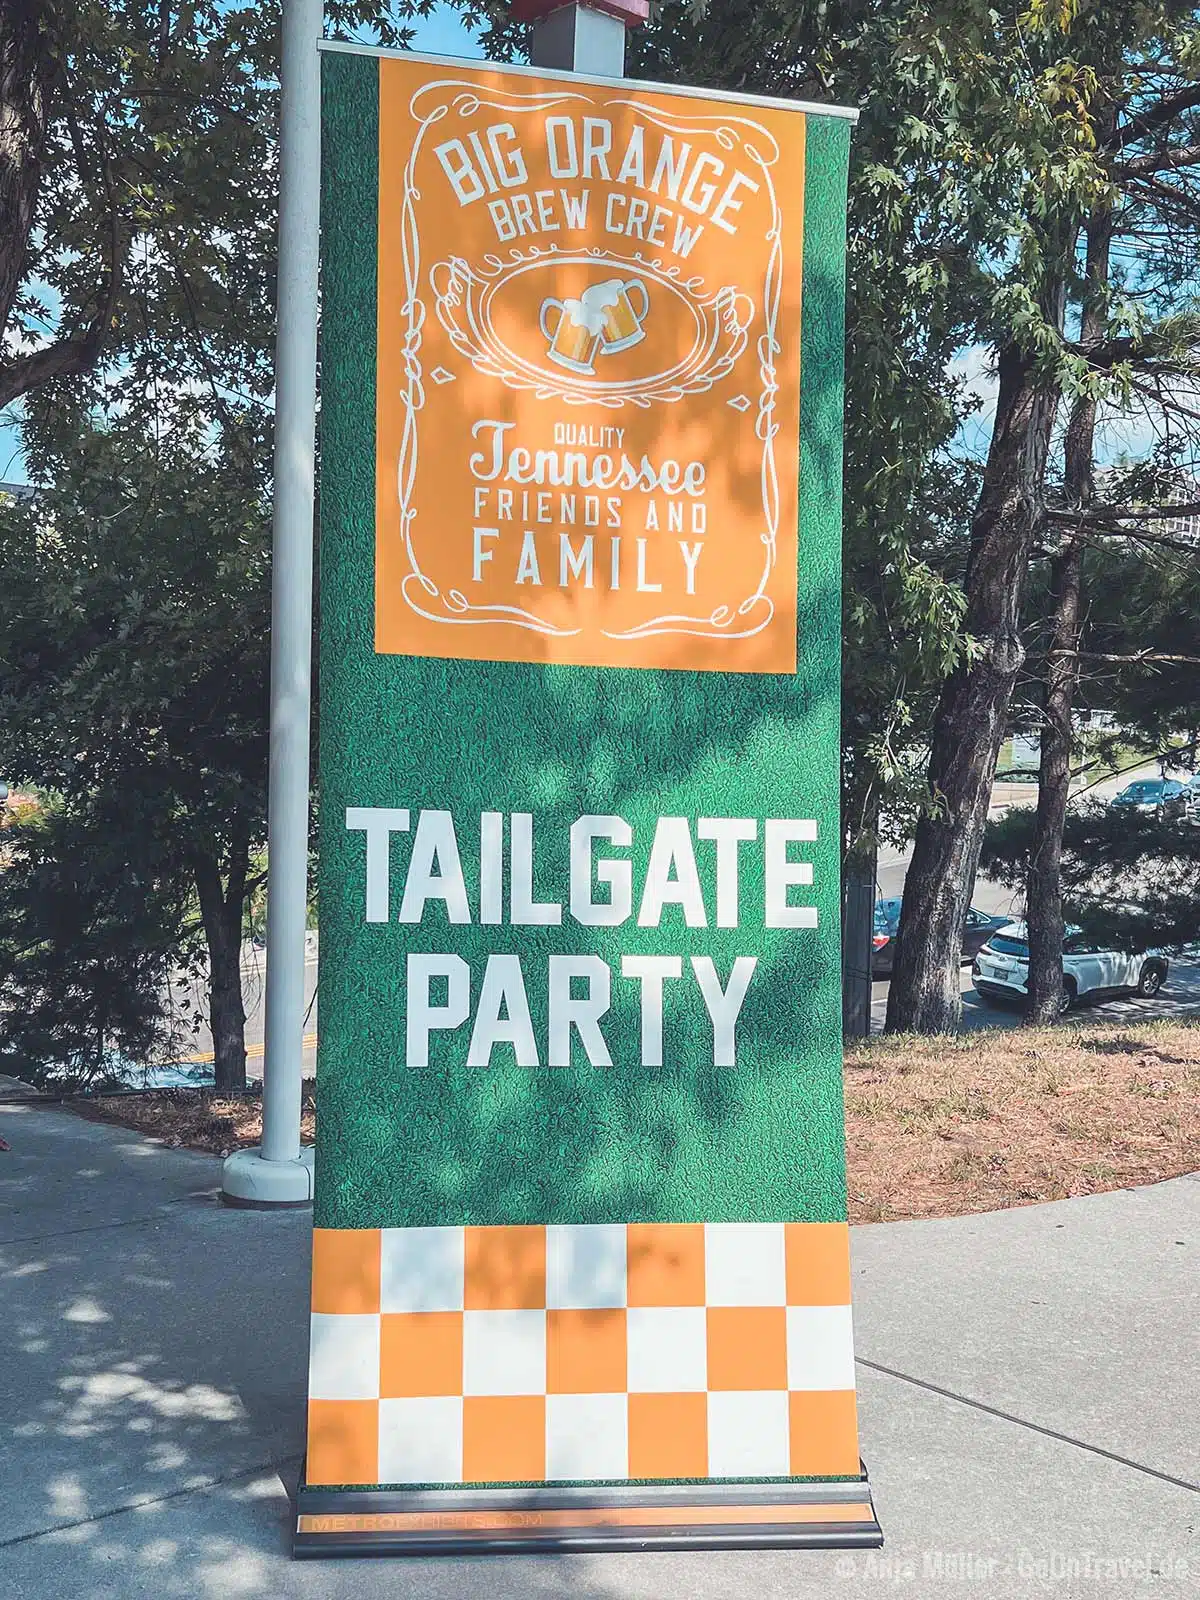 Am Game Day gibt es überall in Knoxville Tailgate Parties